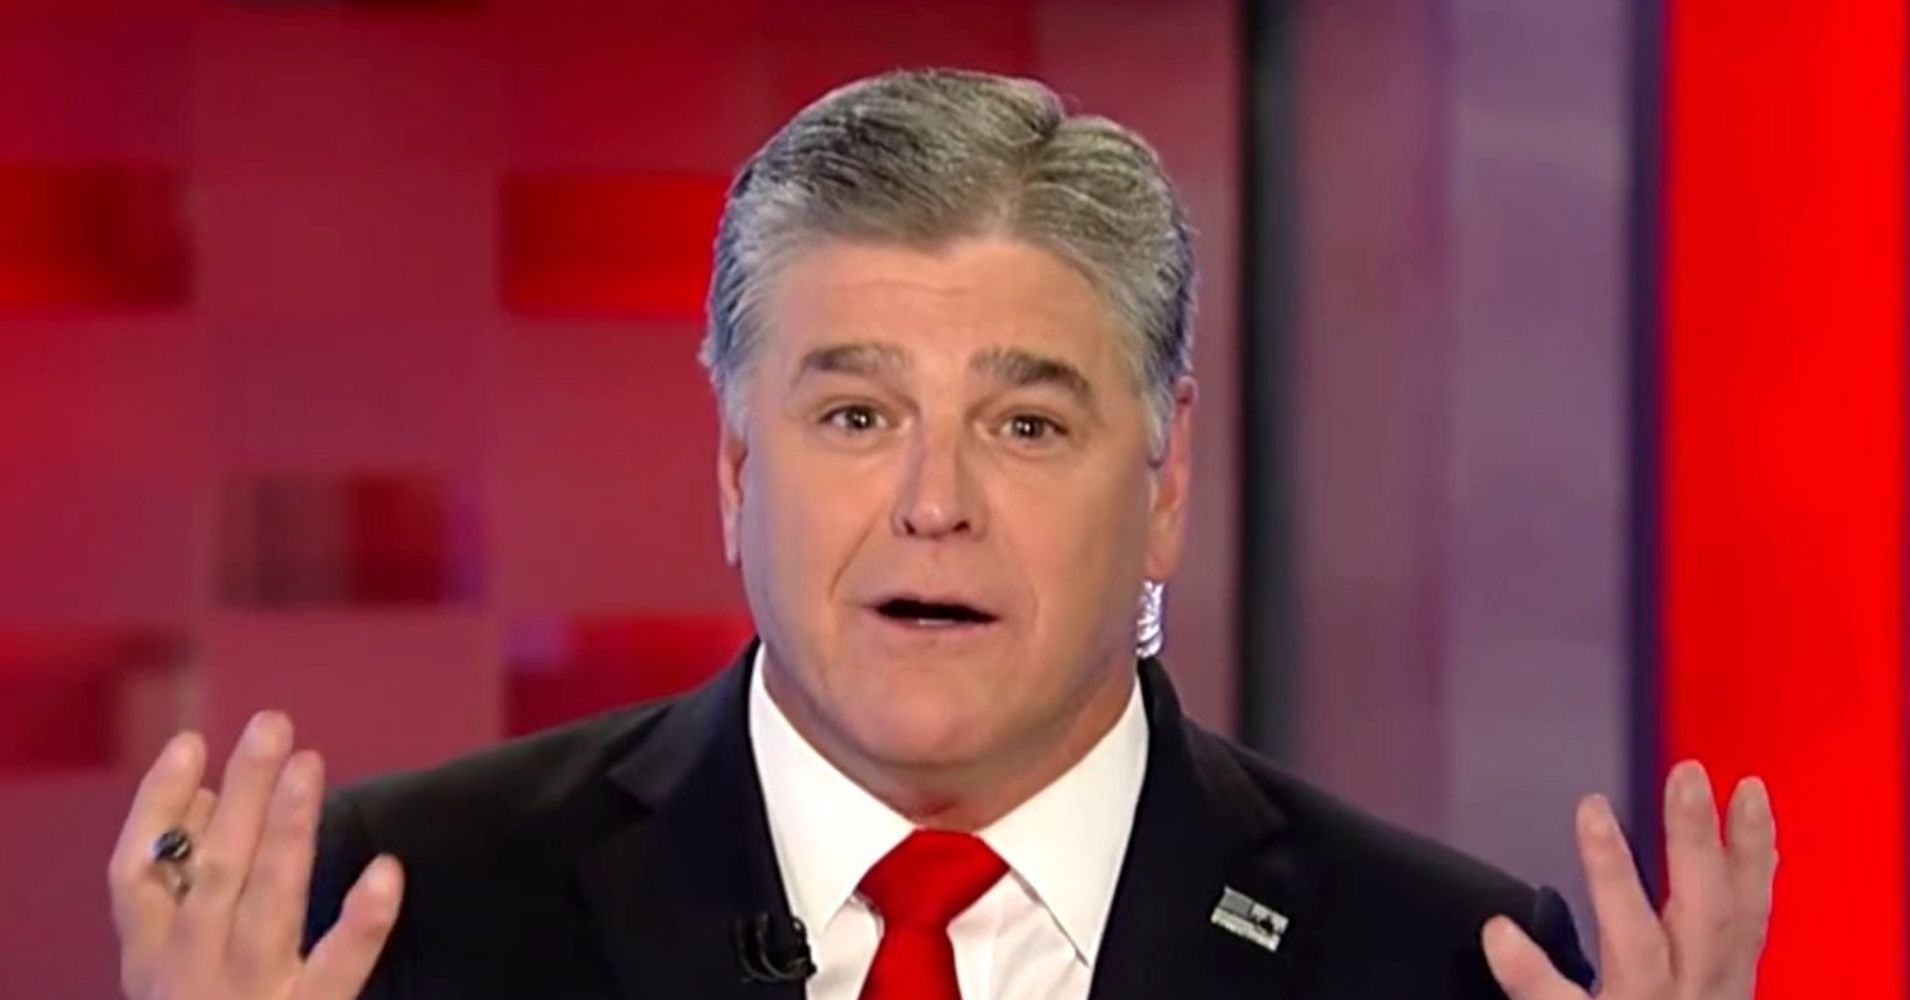 Sean Hannity's Pee Pee Tape Discussion Goes Completely Off The Rails | HuffPost1908 x 1000